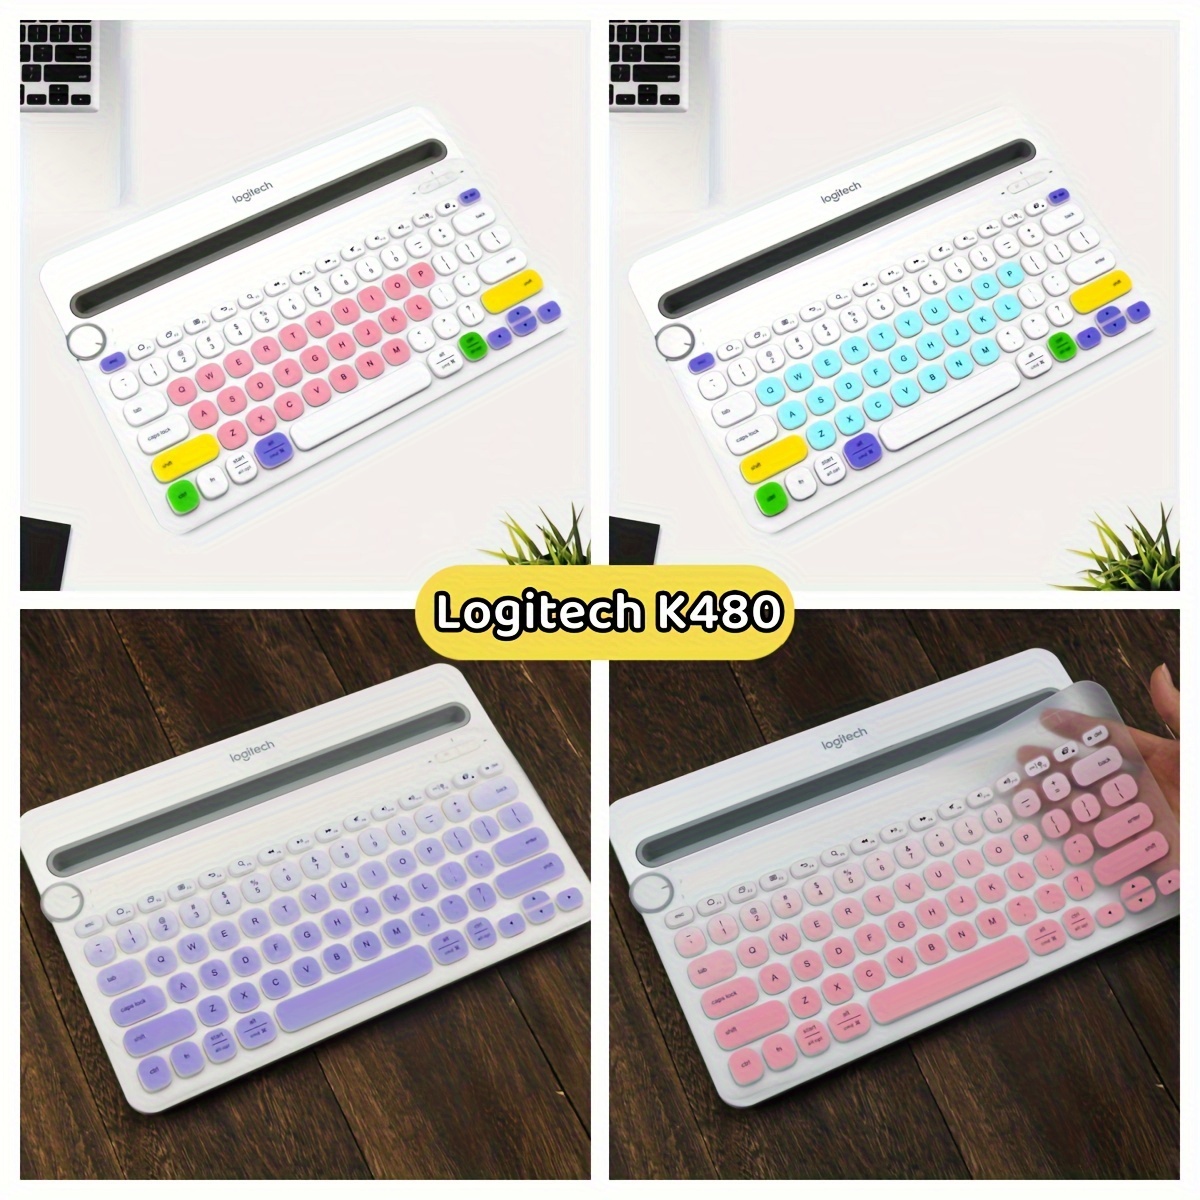 1 Pièce Protege clavier, Protection clavier, Protection clavier ordinateur  portable, Protege clavier silicone, Universal silicone film clavier  protecteur, Pour ordinateur portable 15-17 pouces : : Informatique